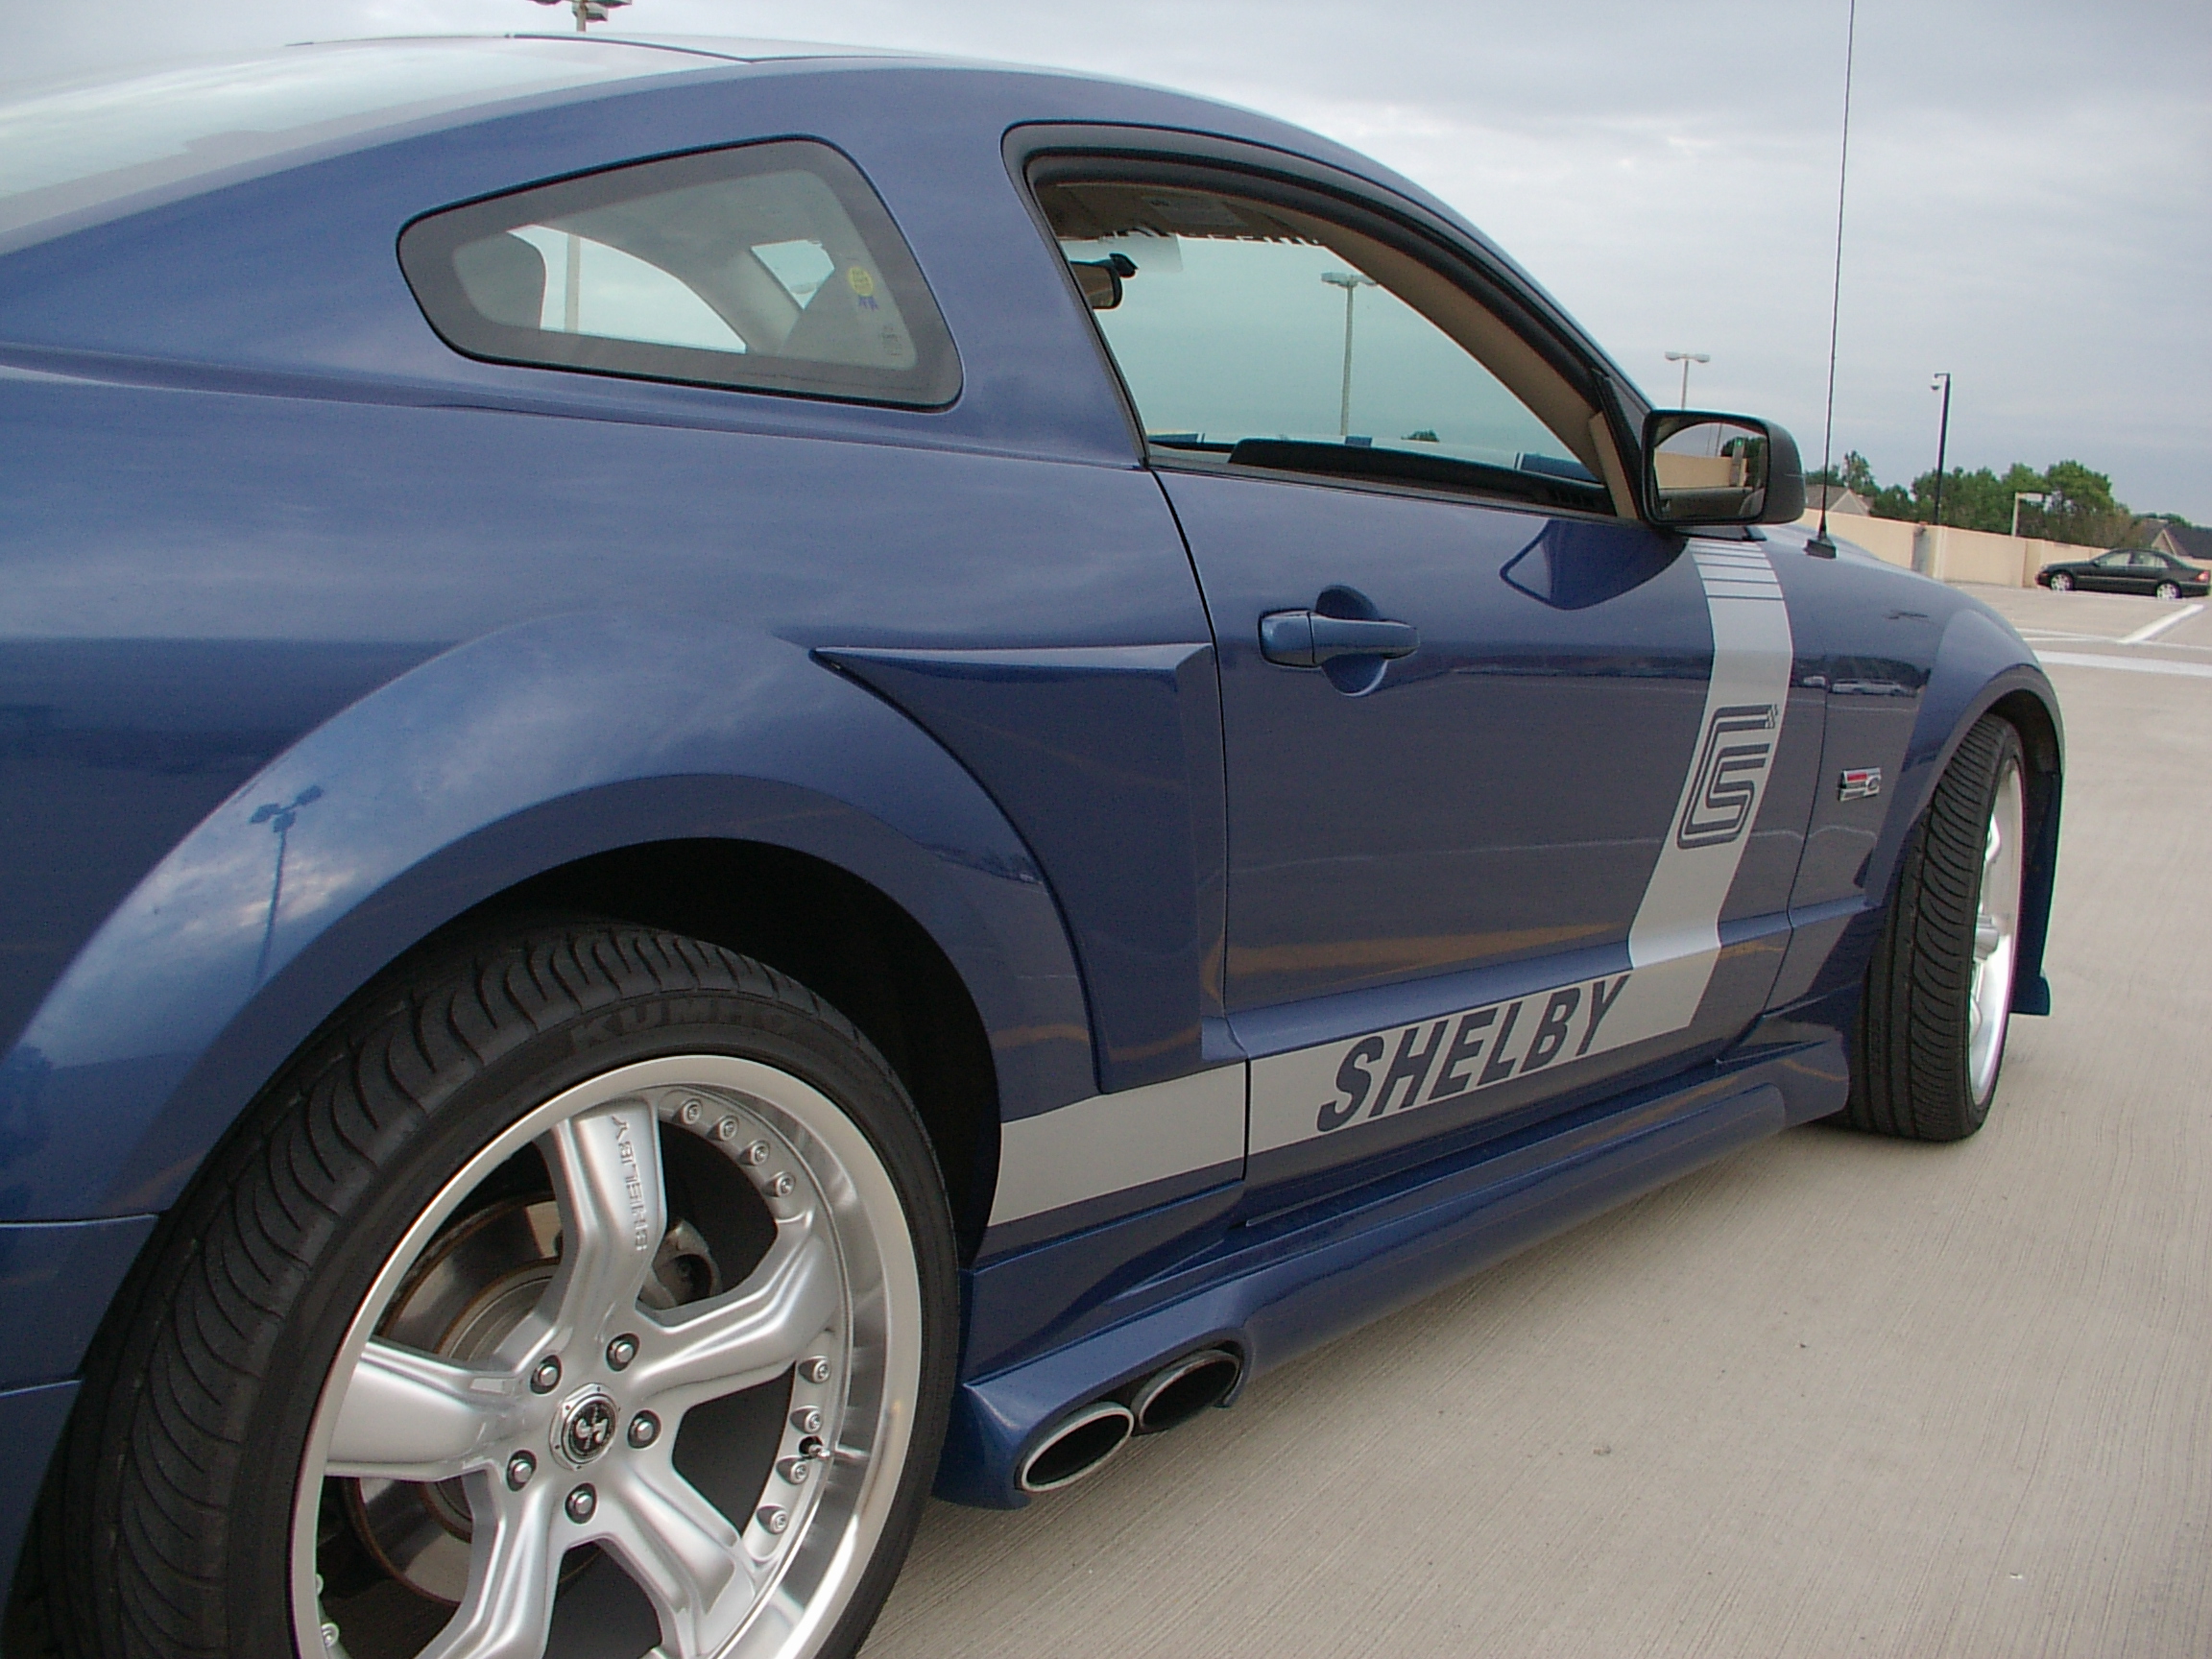  2006 Ford Mustang Shelby CS8